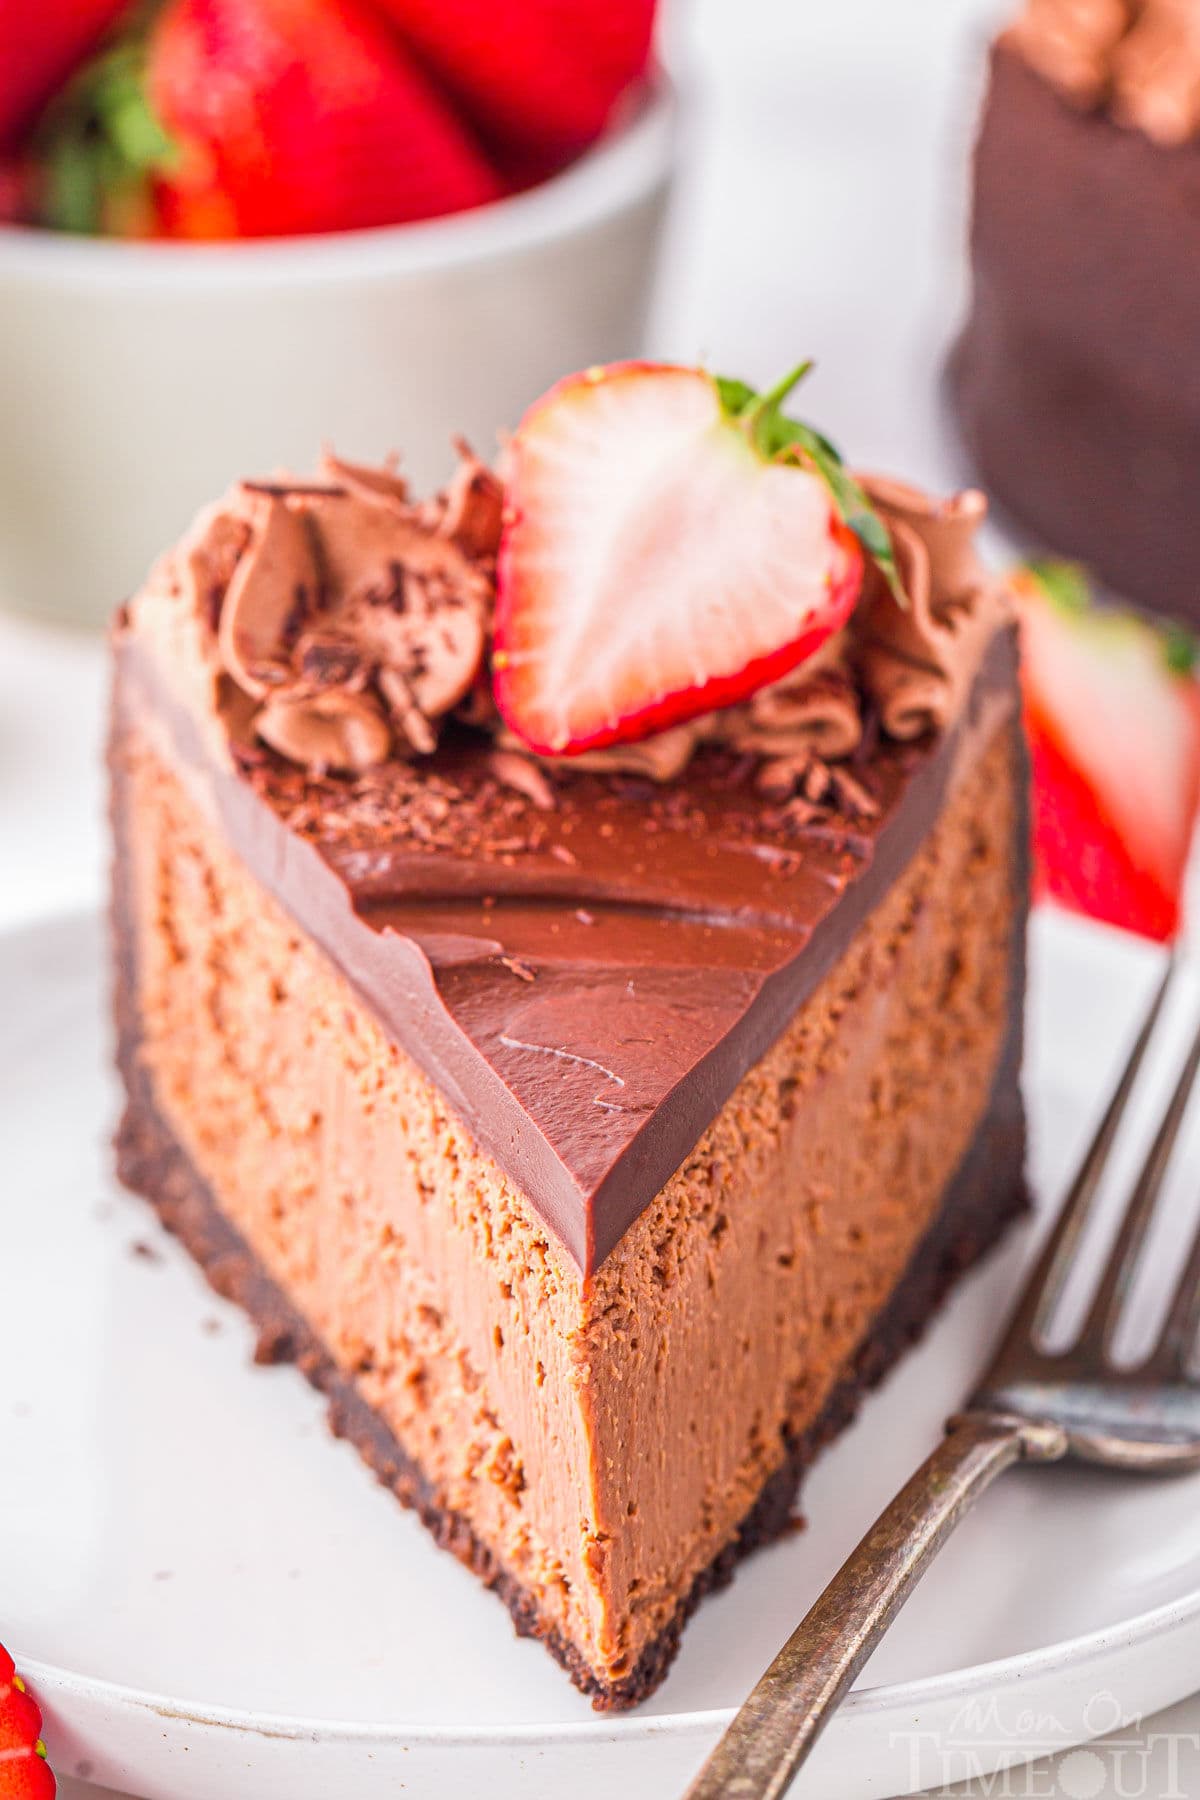 Slice of decadent chocolate cheesecake with an oreo crust and rich chocolate ganache on white round plate. Topped with chocolate shavings and fresh strawberries. Strawberries and more cheesecake can be seen in the background.